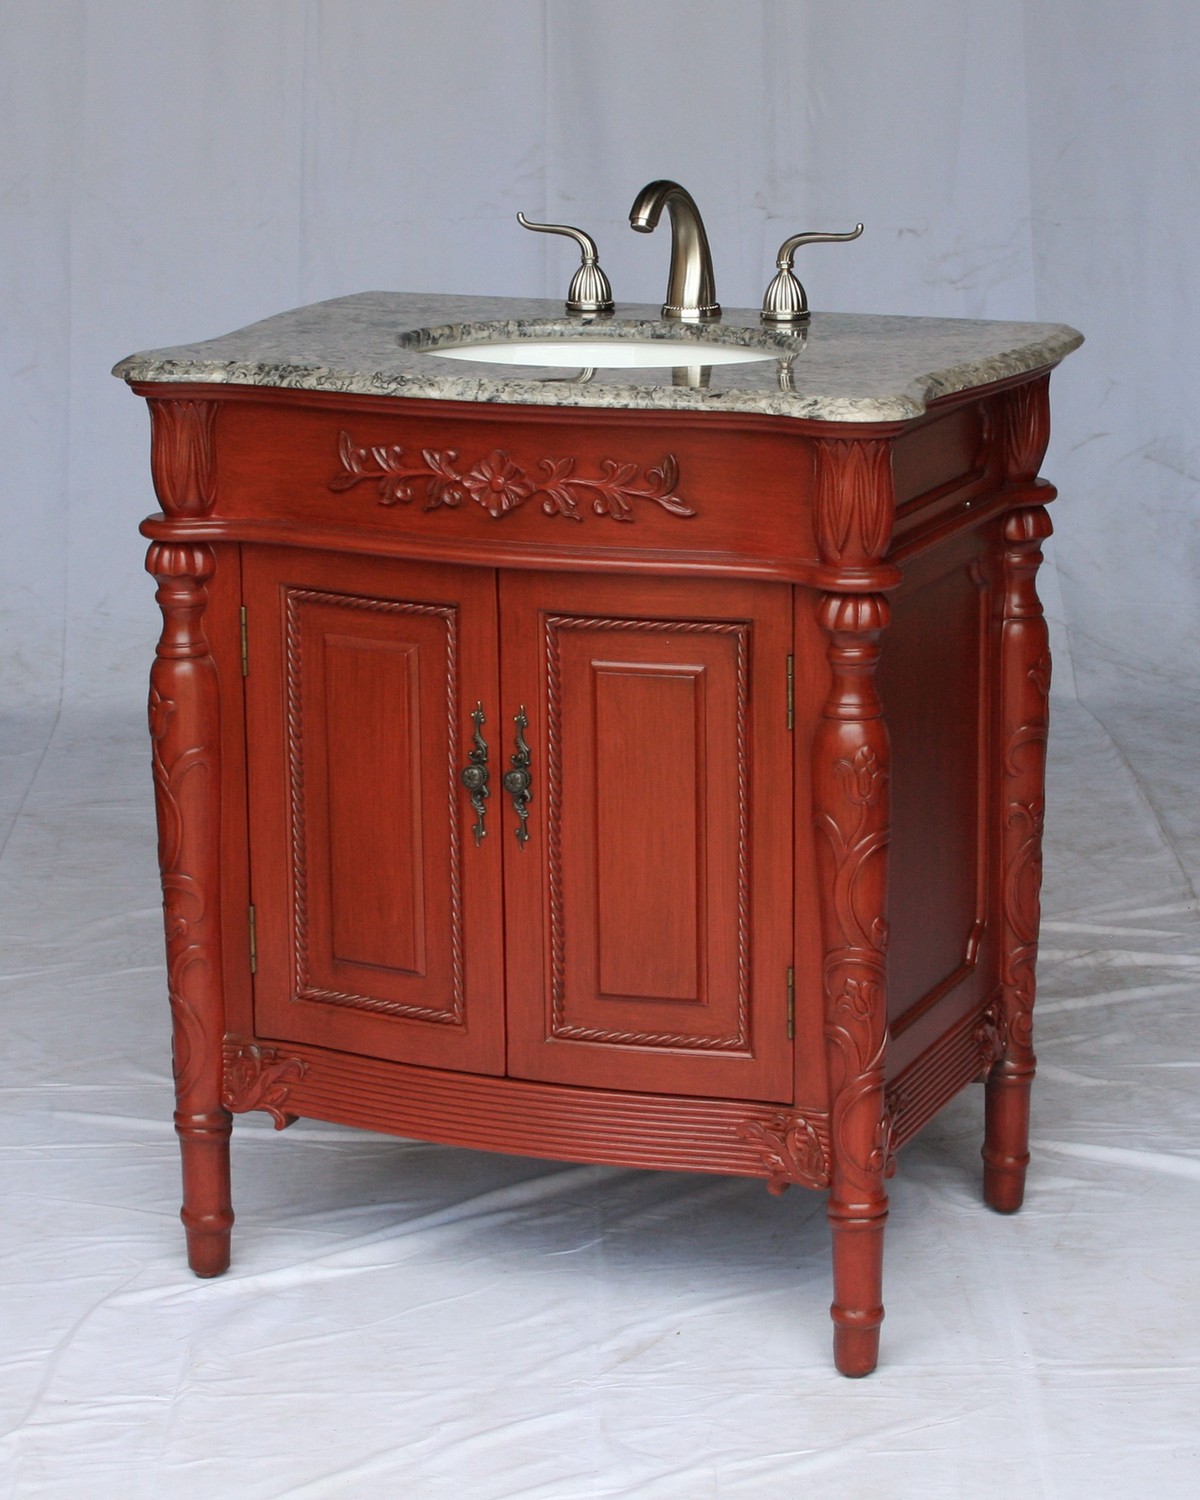 32" Adelina Antique Style Single Sink Bathroom Vanity with Gray Granite Countertop and Cherry Finish